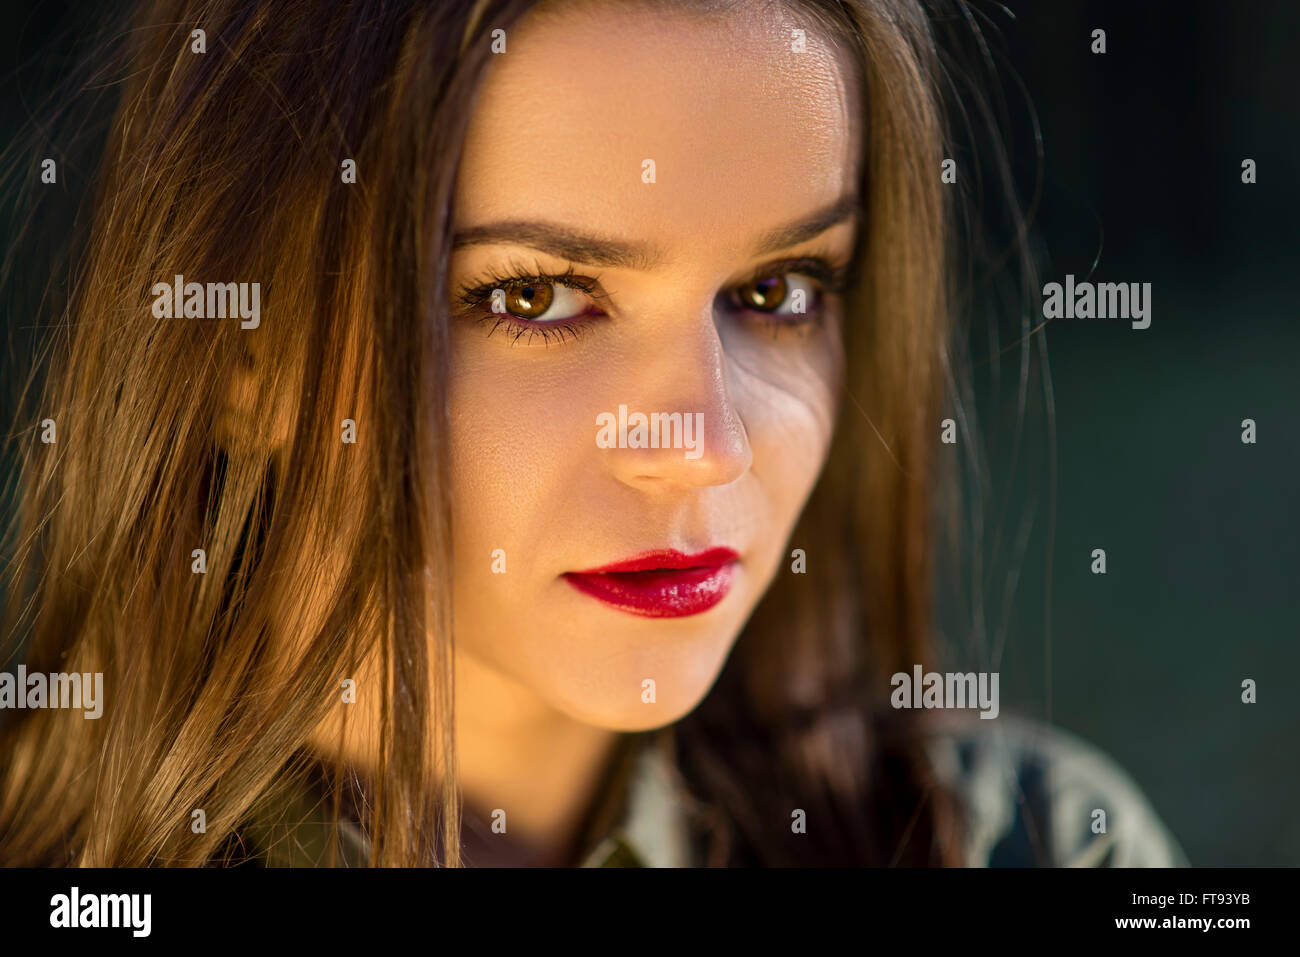 Hint on smile. A close-up portrait of a teenage girl with a cold look and a hint of an smile. Girl has red lips and brown eyes. Stock Photo